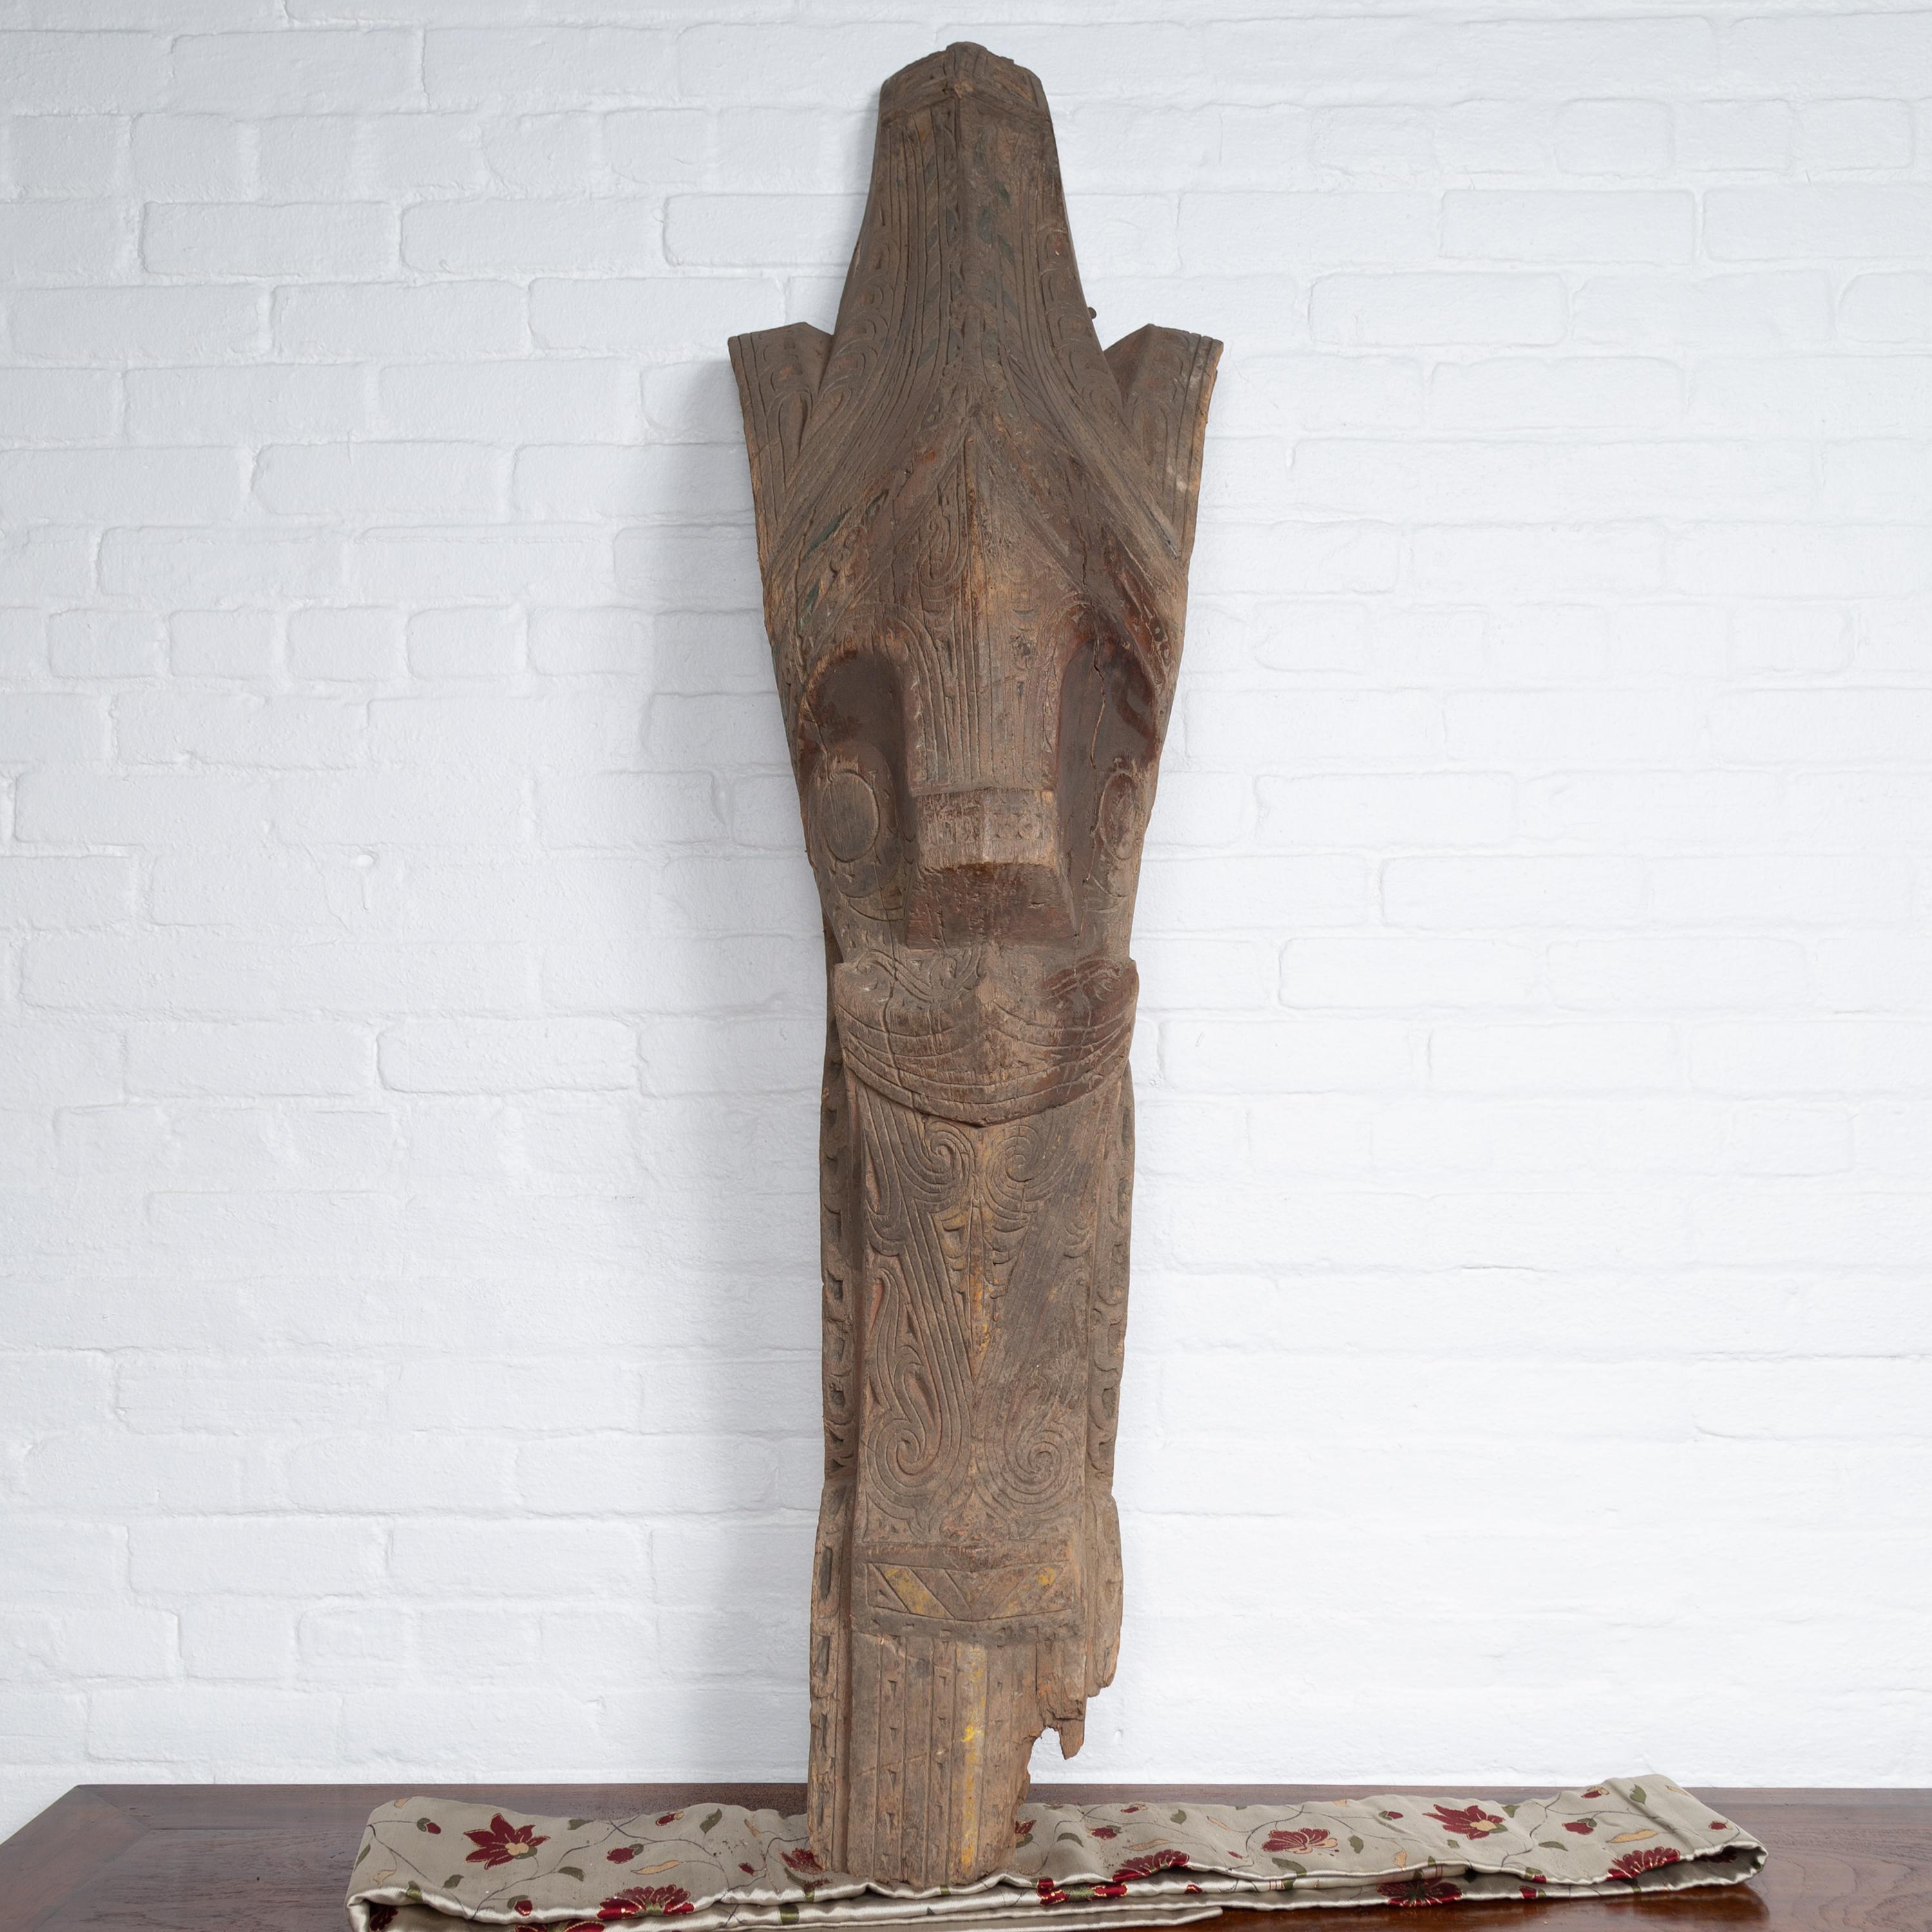 A large antique hand carved tribal carving from the Batak People, northern Sumatra, called a Singa Singa with traces of green and yellow polychromy and nicely weathered appearance. Attracting our eyes with its charismatic presence, this large hand